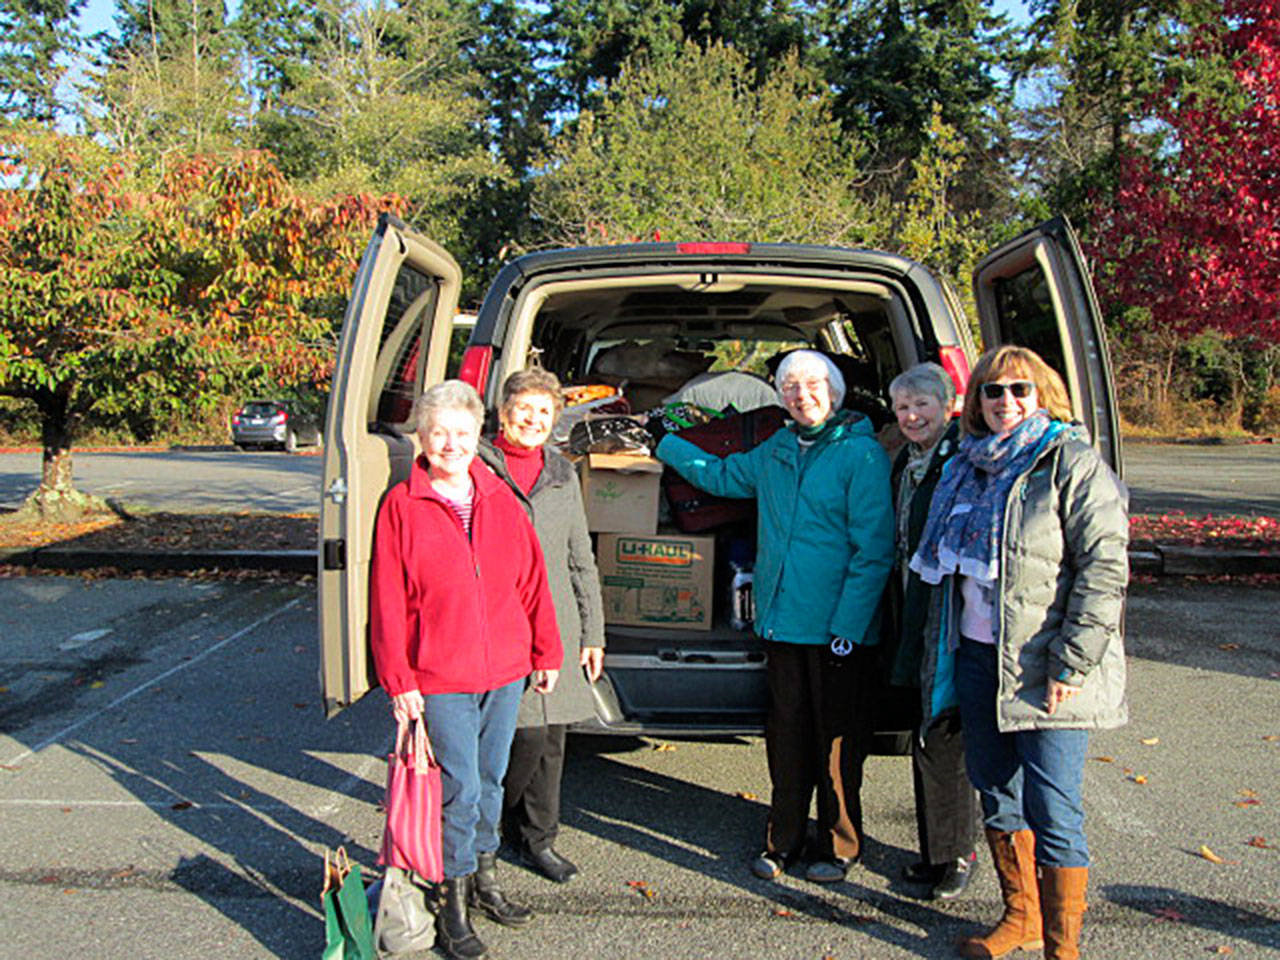 Contributed photo — Parishioners from St Hubert Catholic Church, Trinity Lutheran Church and Langley United Methodist Church collected gifts for people at Western State Hospital in time for the holiday.